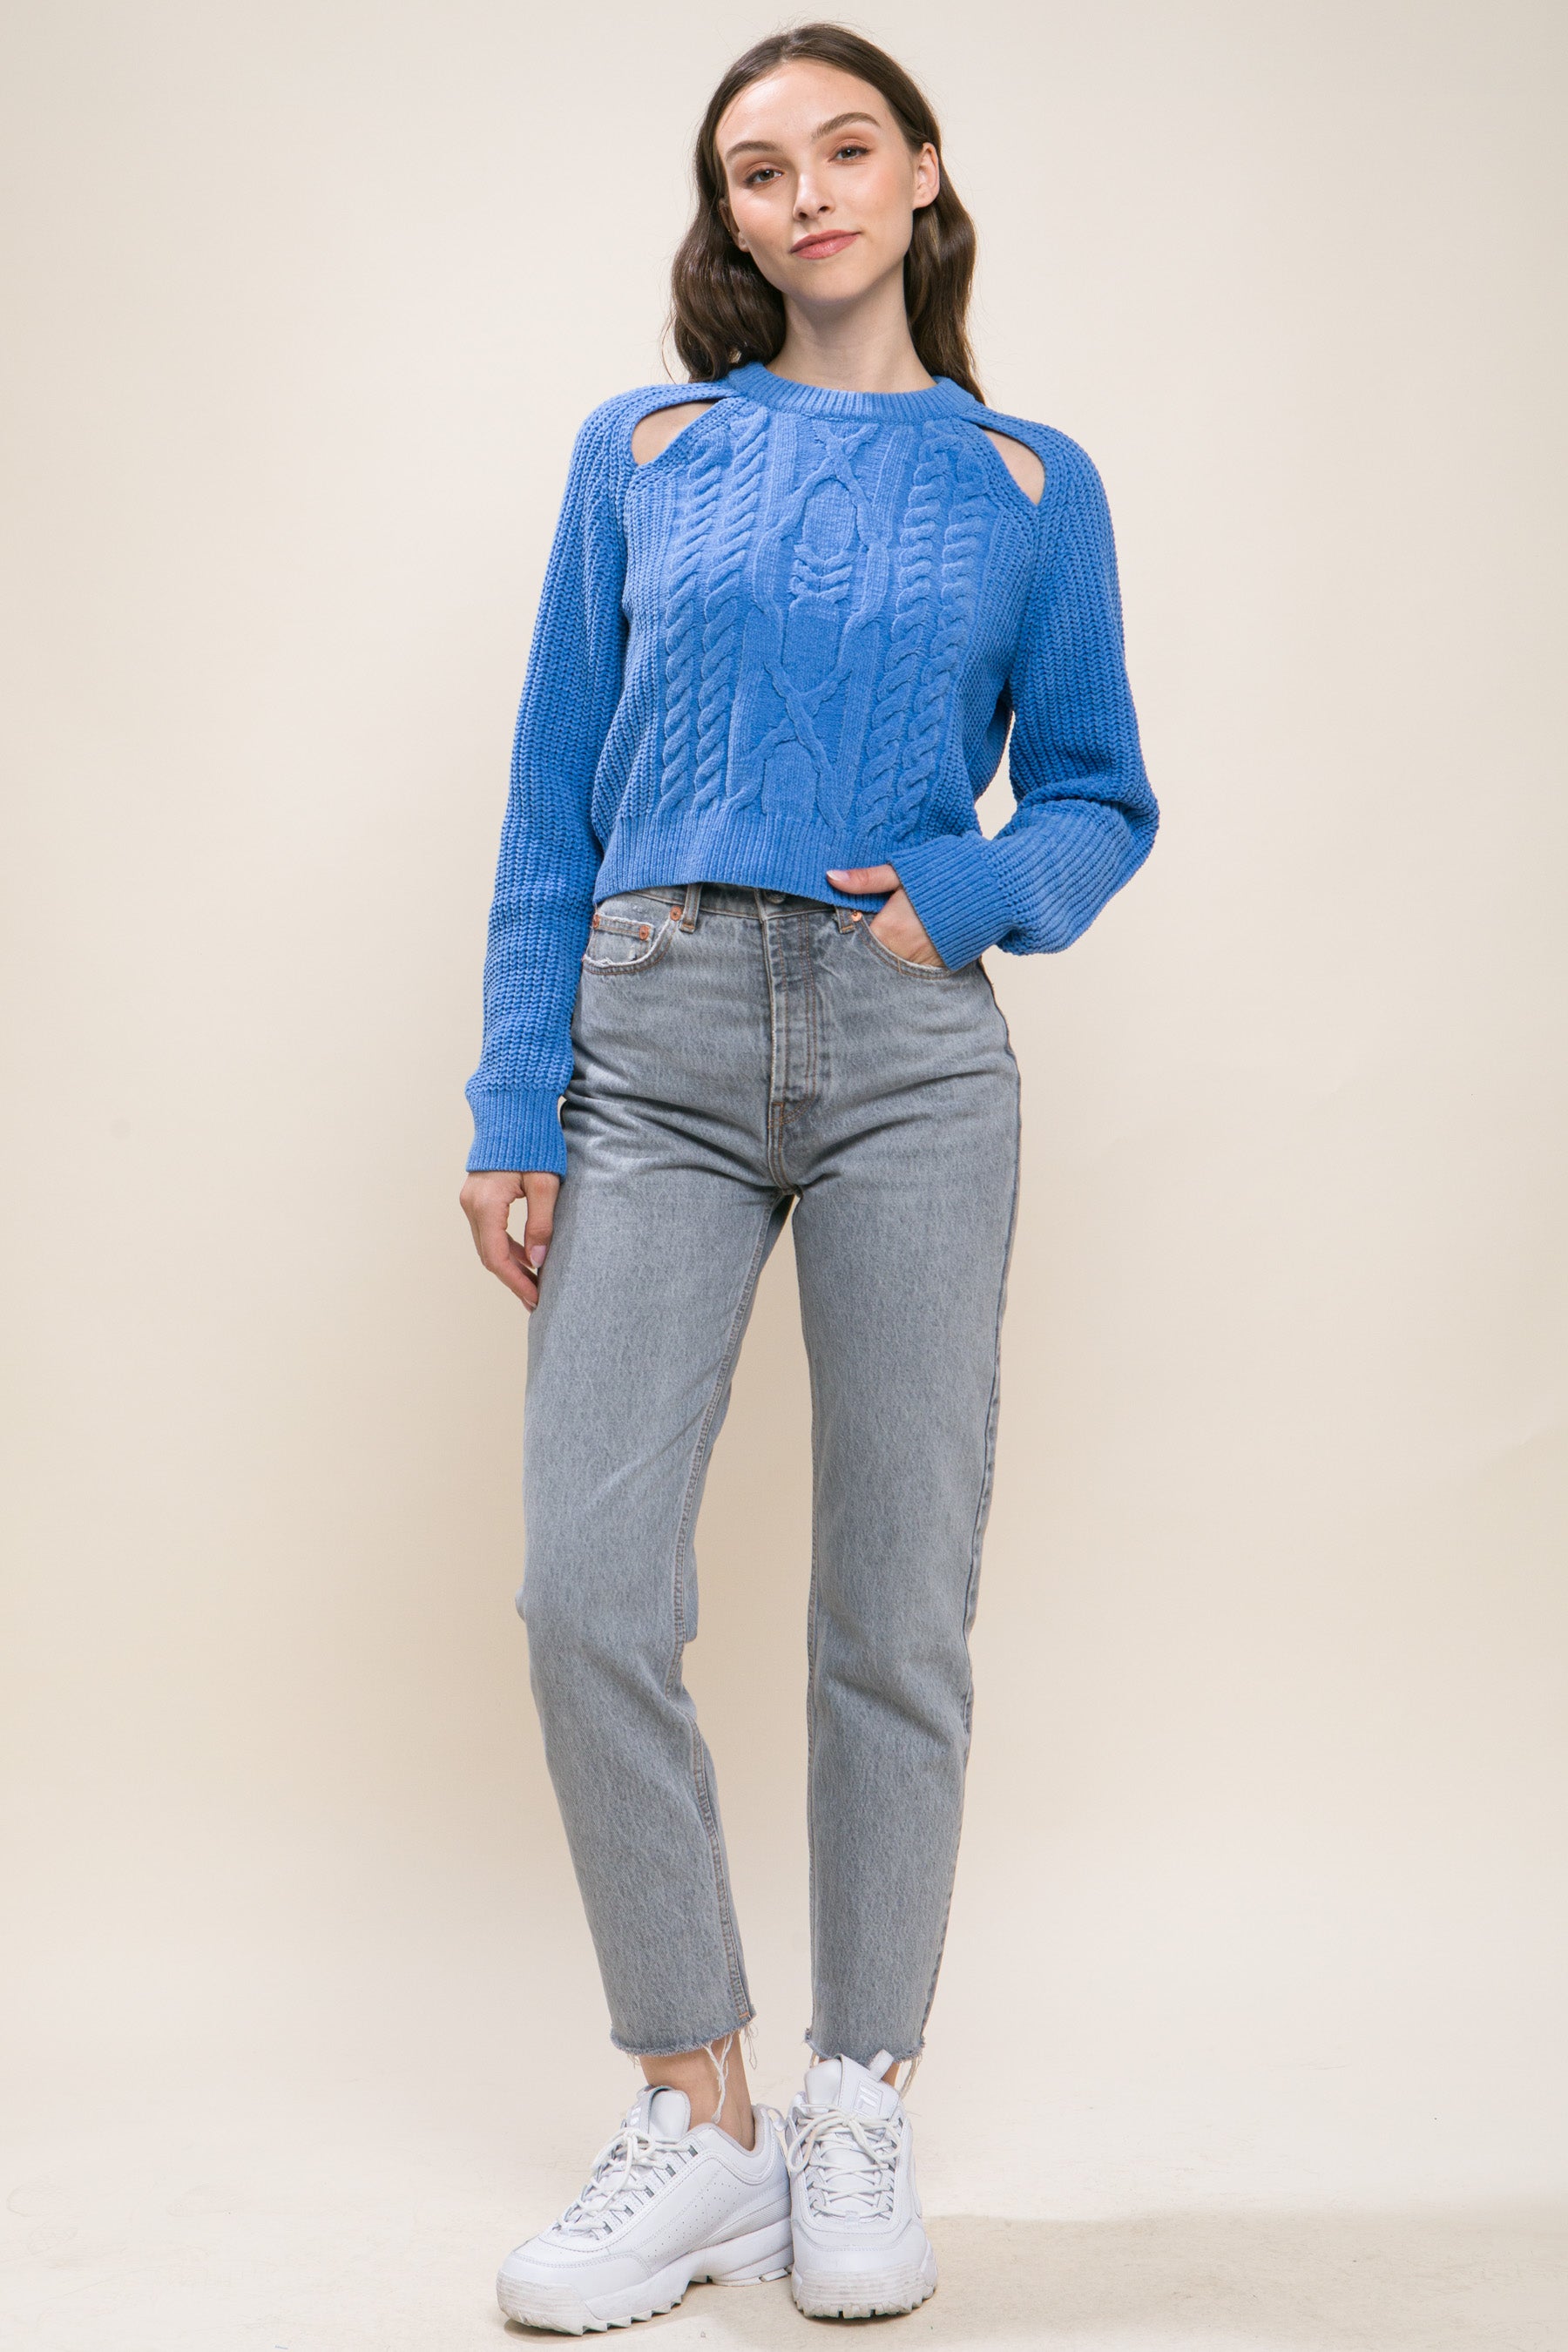 Blue - Women's Knit Pullover Sweater With Cold Shoulder Detail - 4 colors - womens sweater at TFC&H Co.